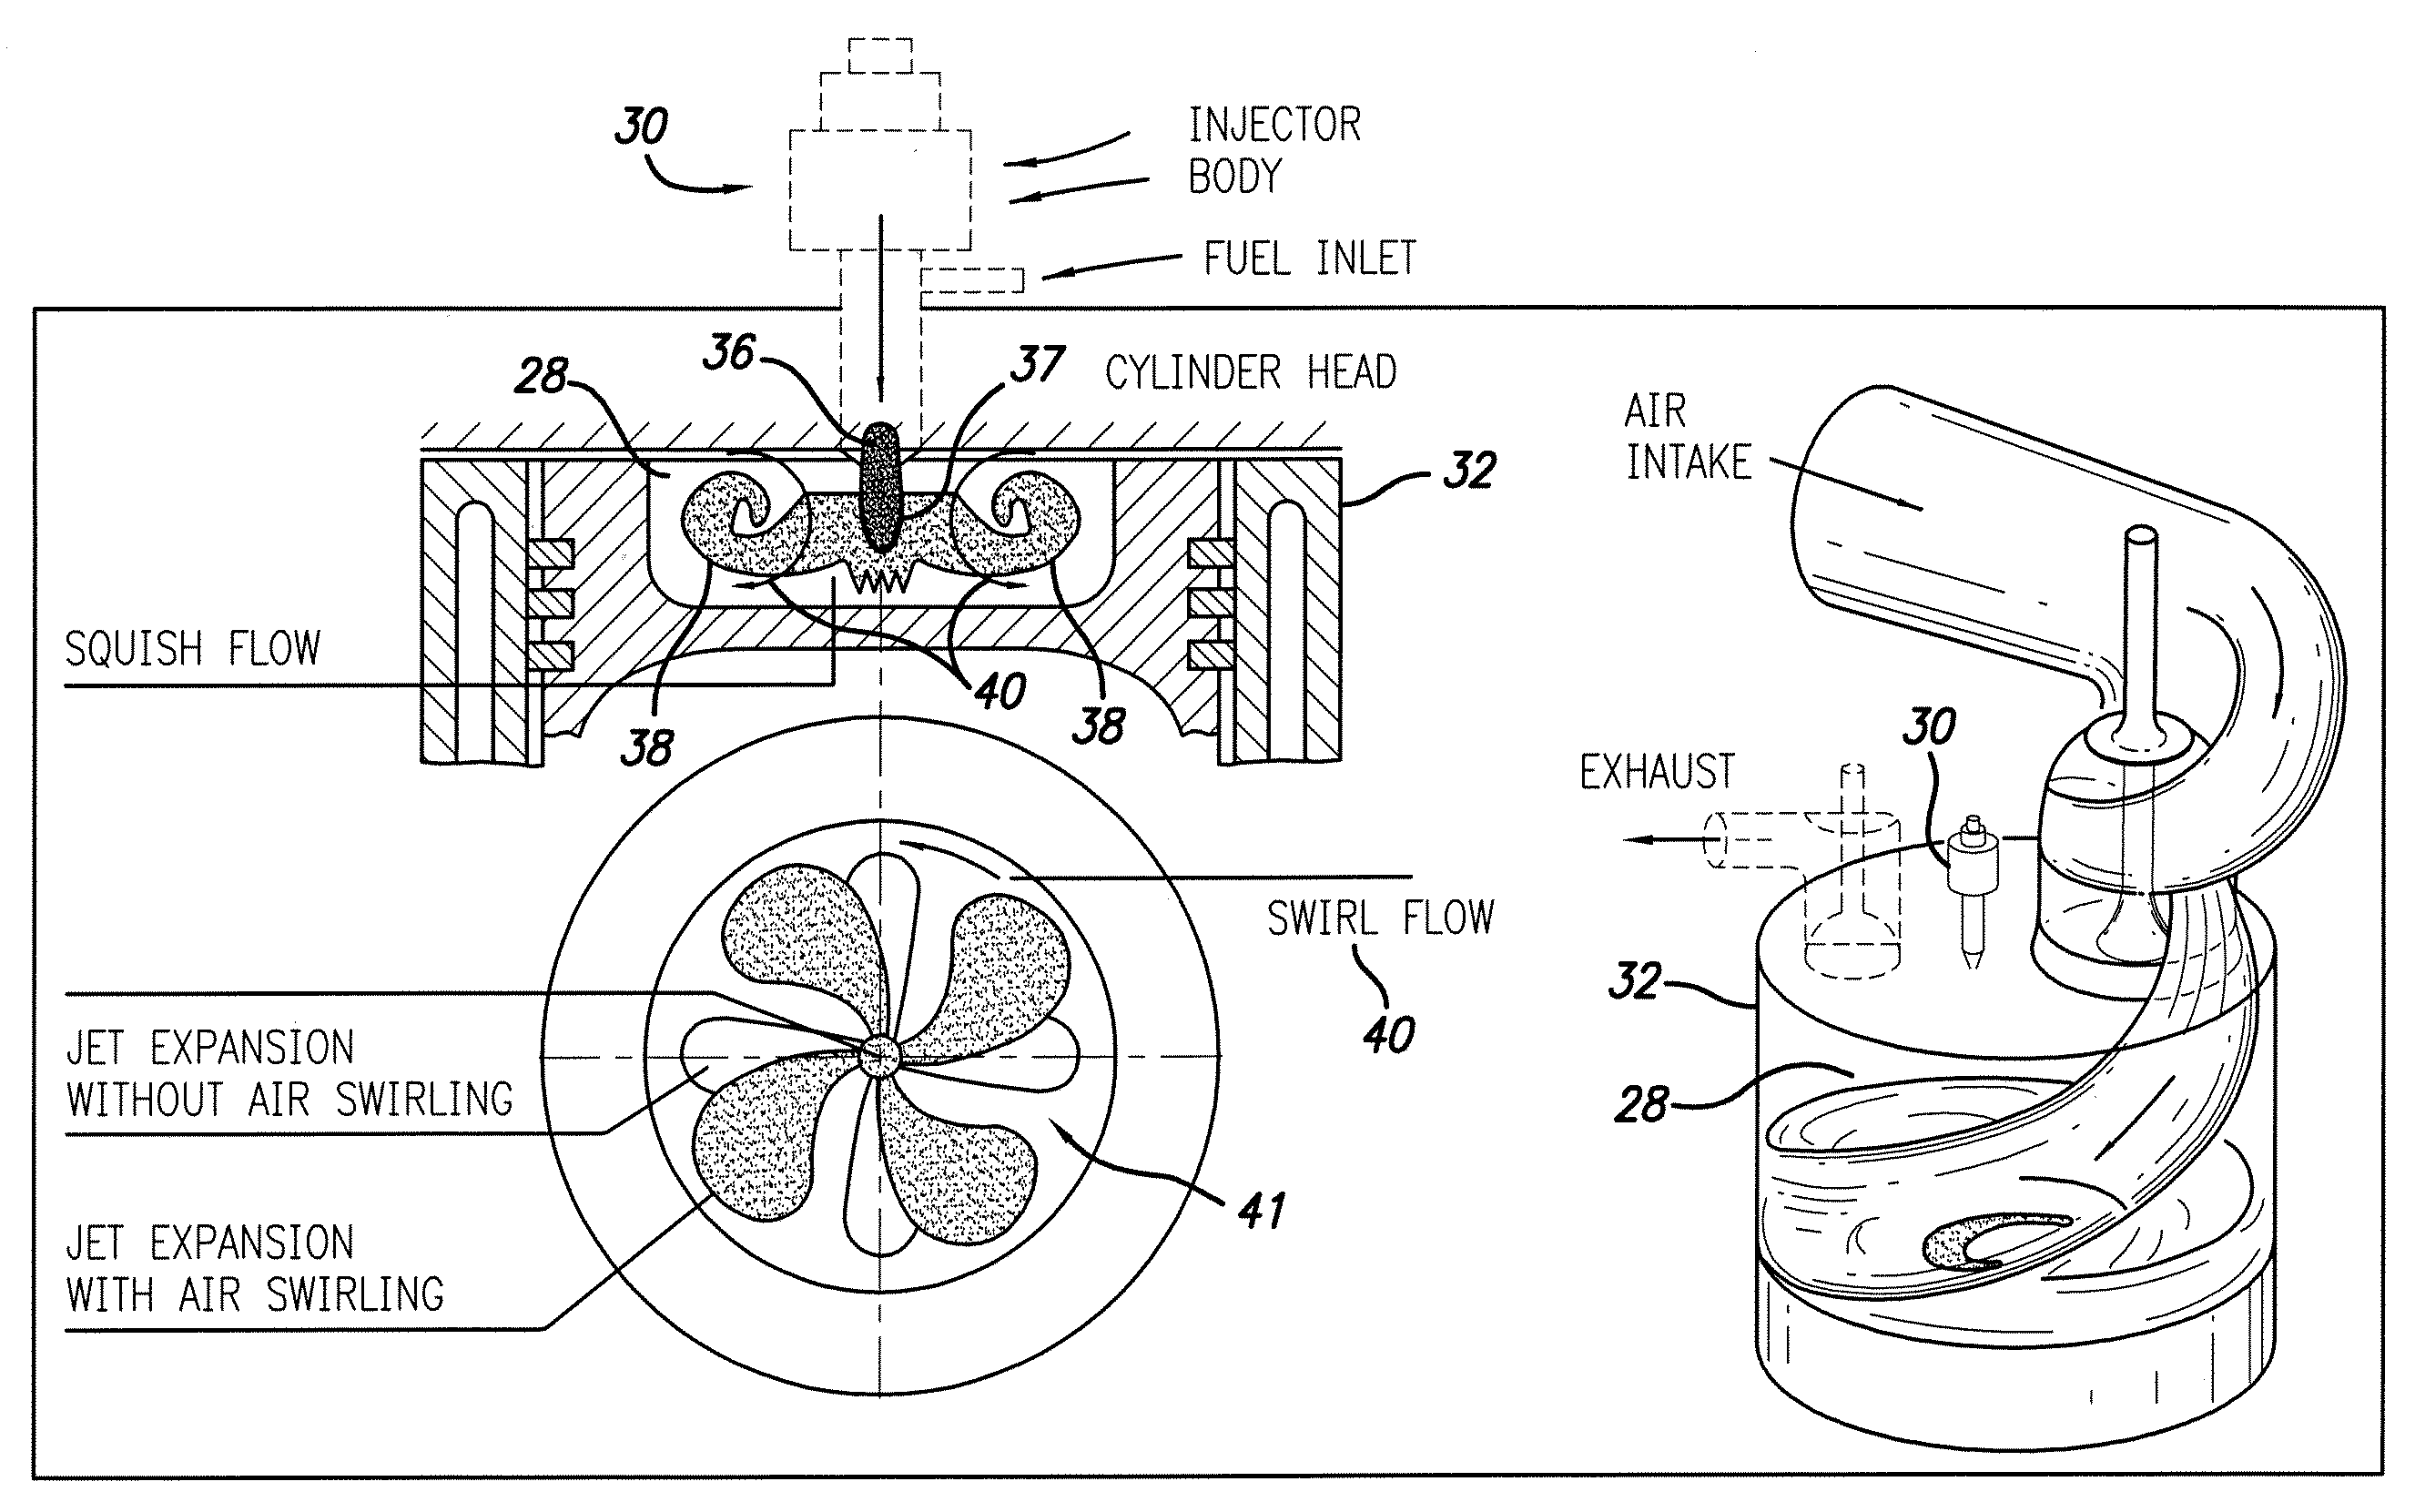 Fuel injector having algorithm controlled look-ahead timing for injector-ignition operation